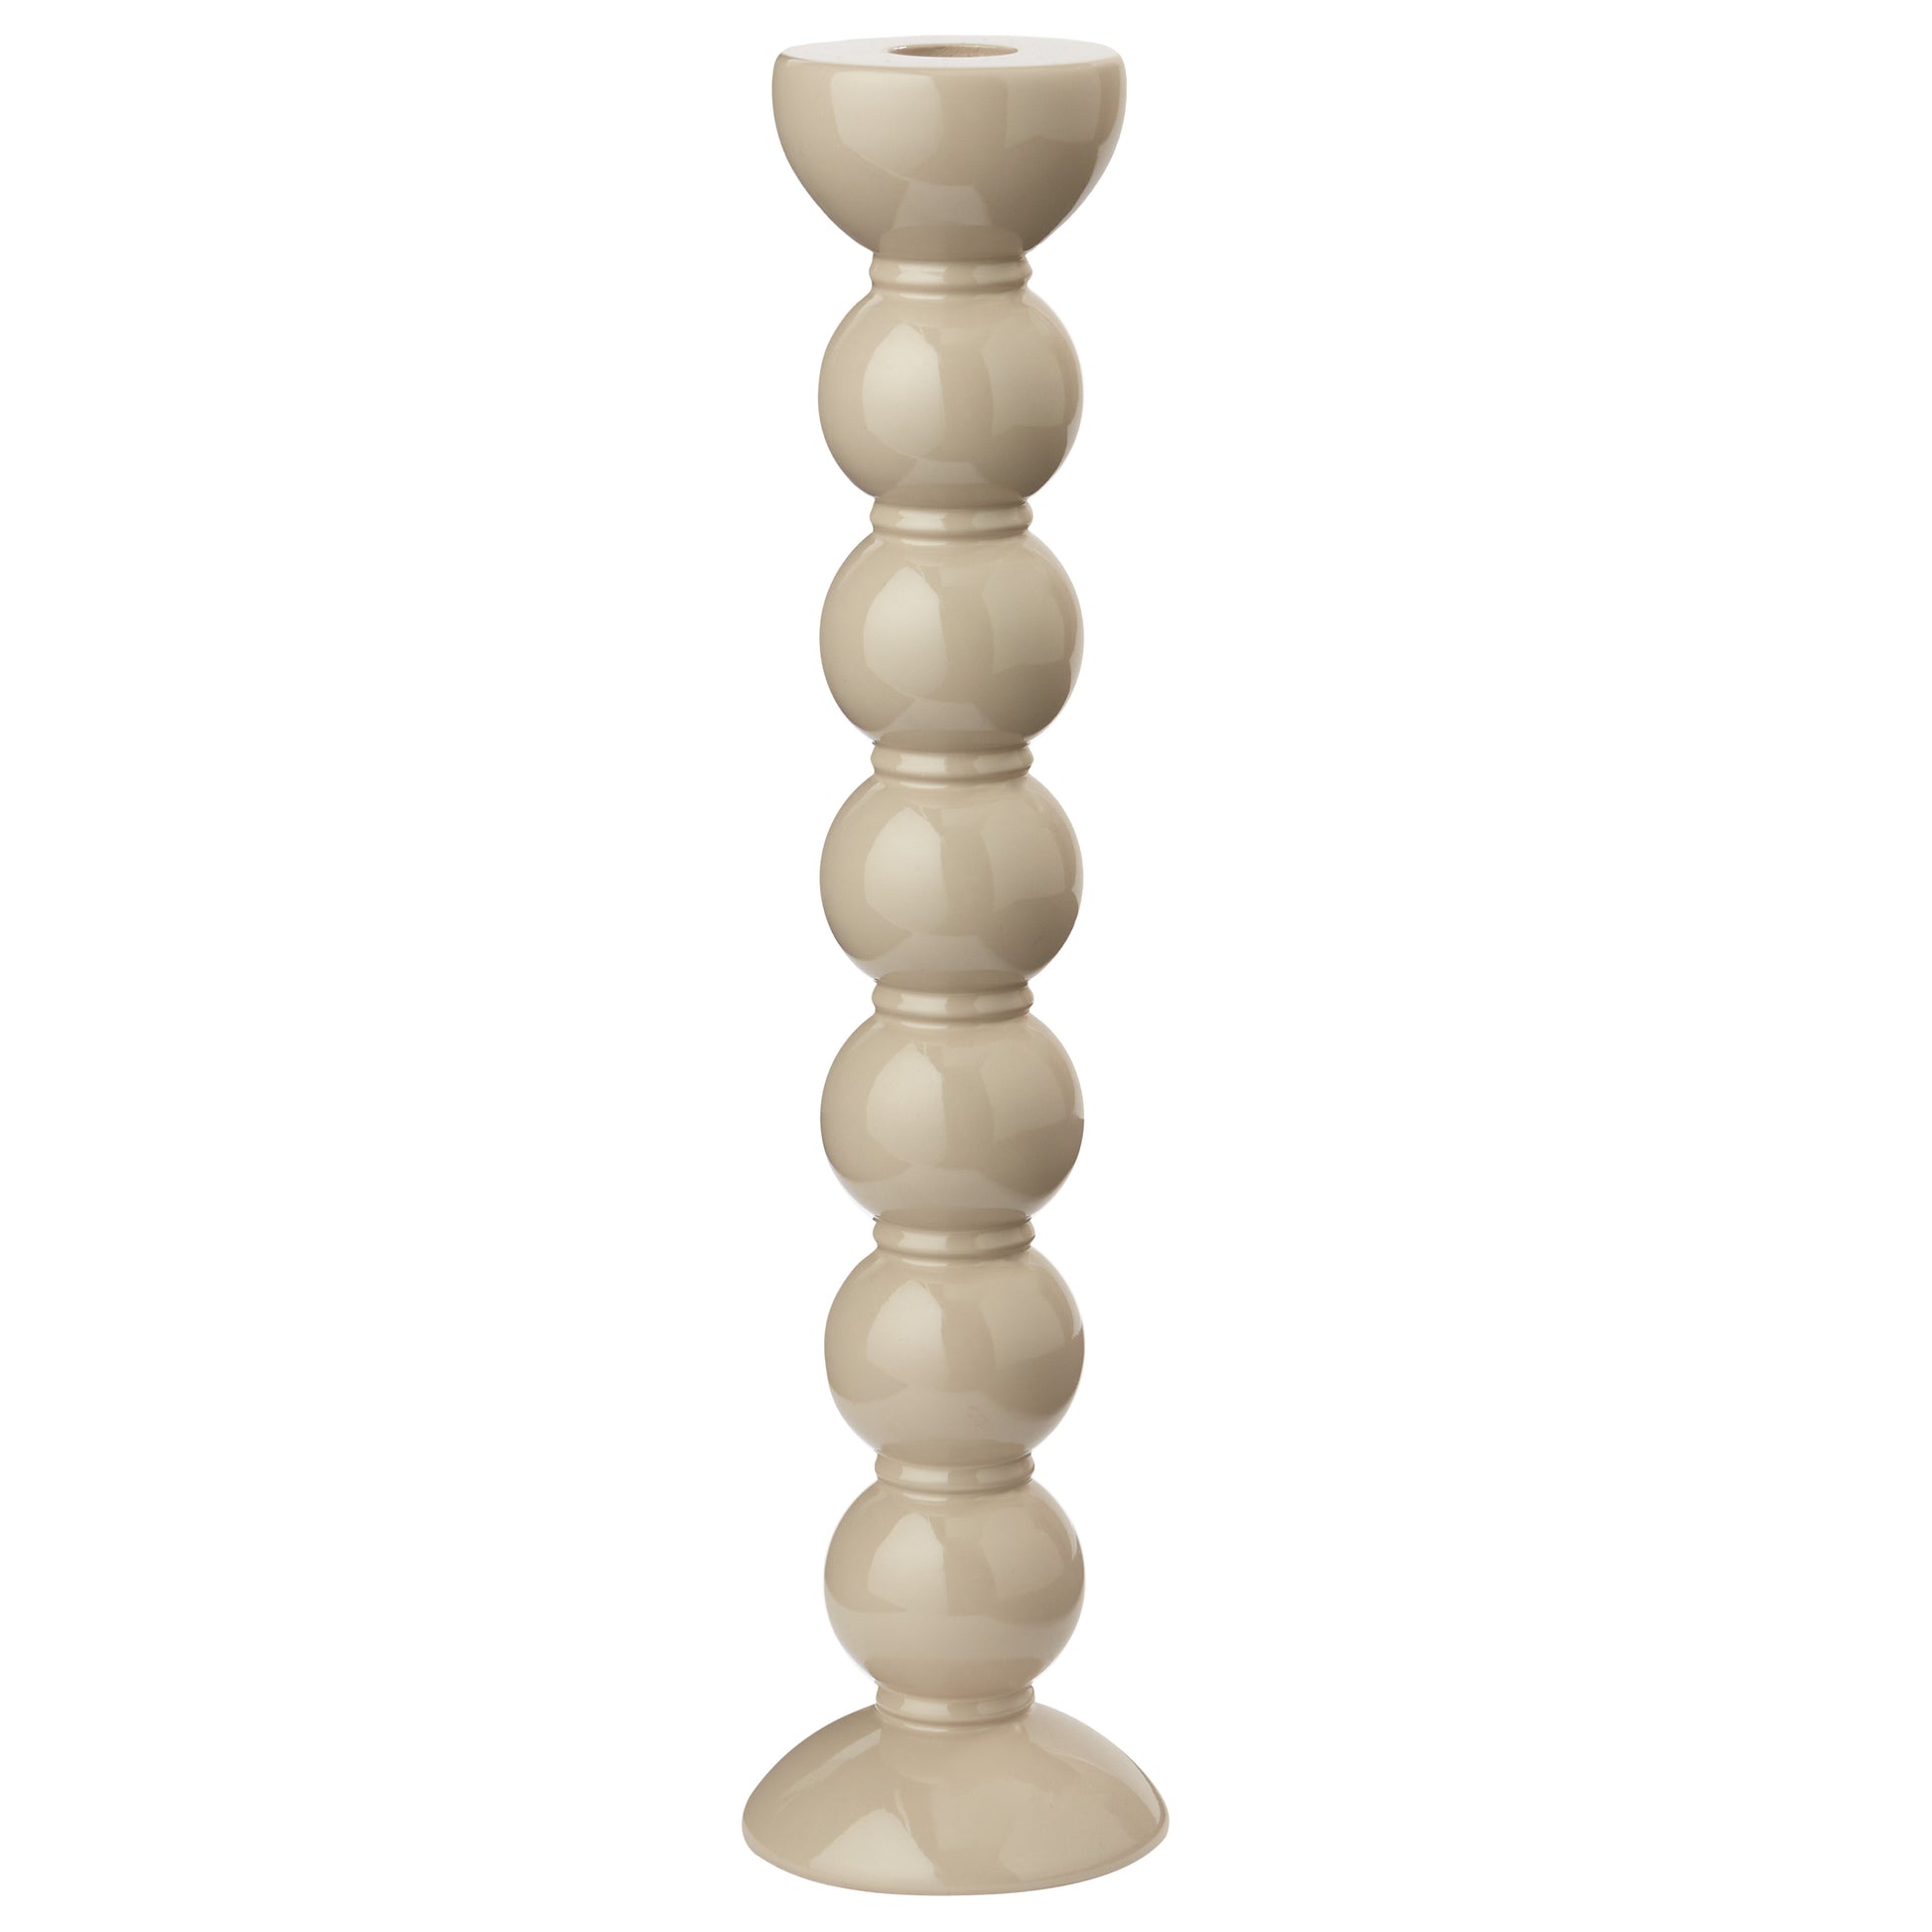 Addison Ross Extra Tall Cappuccino Candlestick